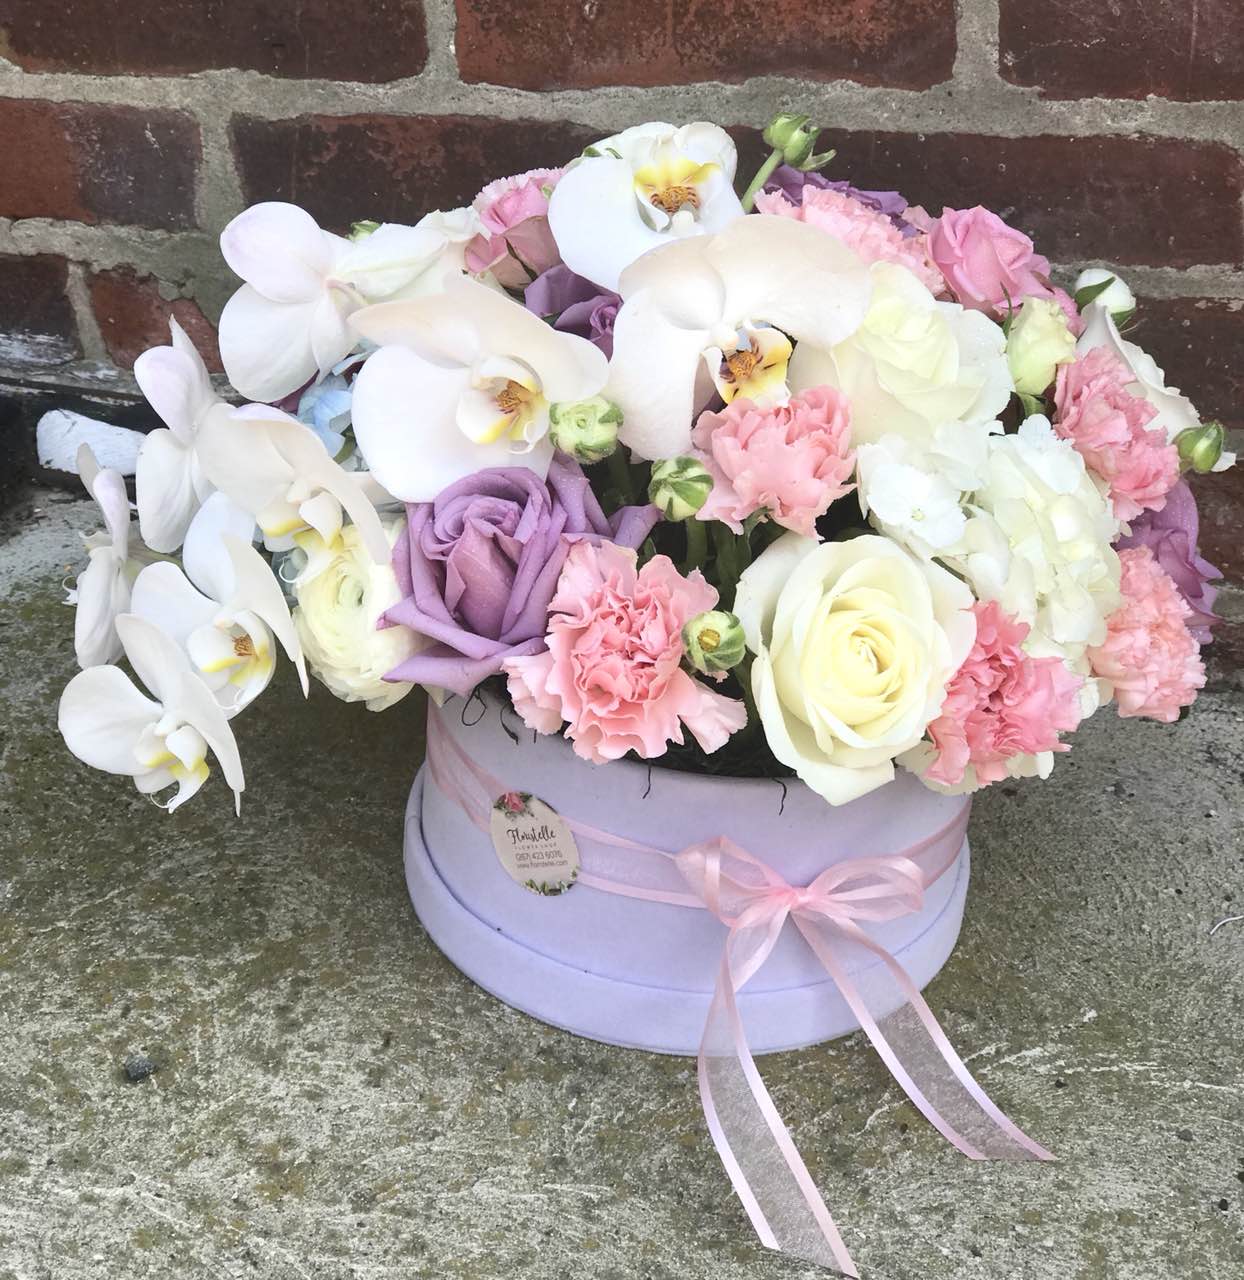 Go all out for love with this  white orchids, lavender roses and other fabulous favorites in a stylish velvet box. She will definitely be bowled over.  Includes:  Orchid, pink carnations, lavender and white roses, white ranunculus. Velvet box Free message card